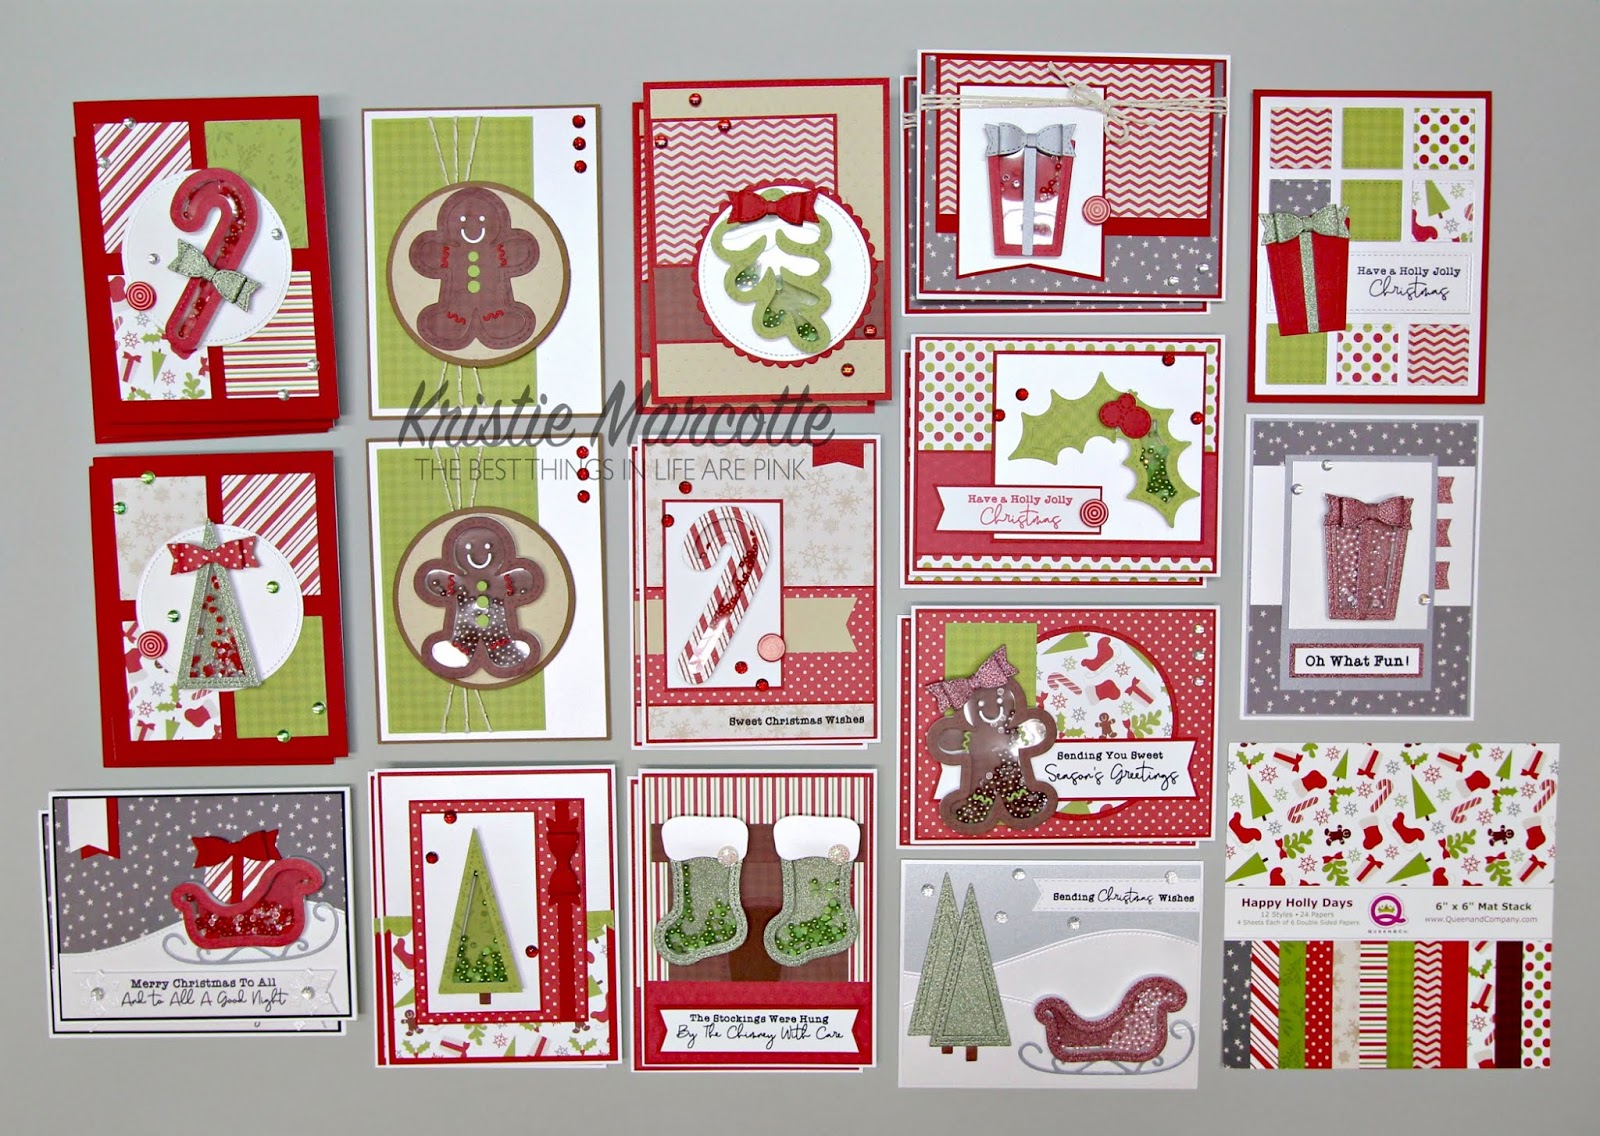 Queen & Company Happy Holly Days kit – 26 cards from one 6×6 paper pad